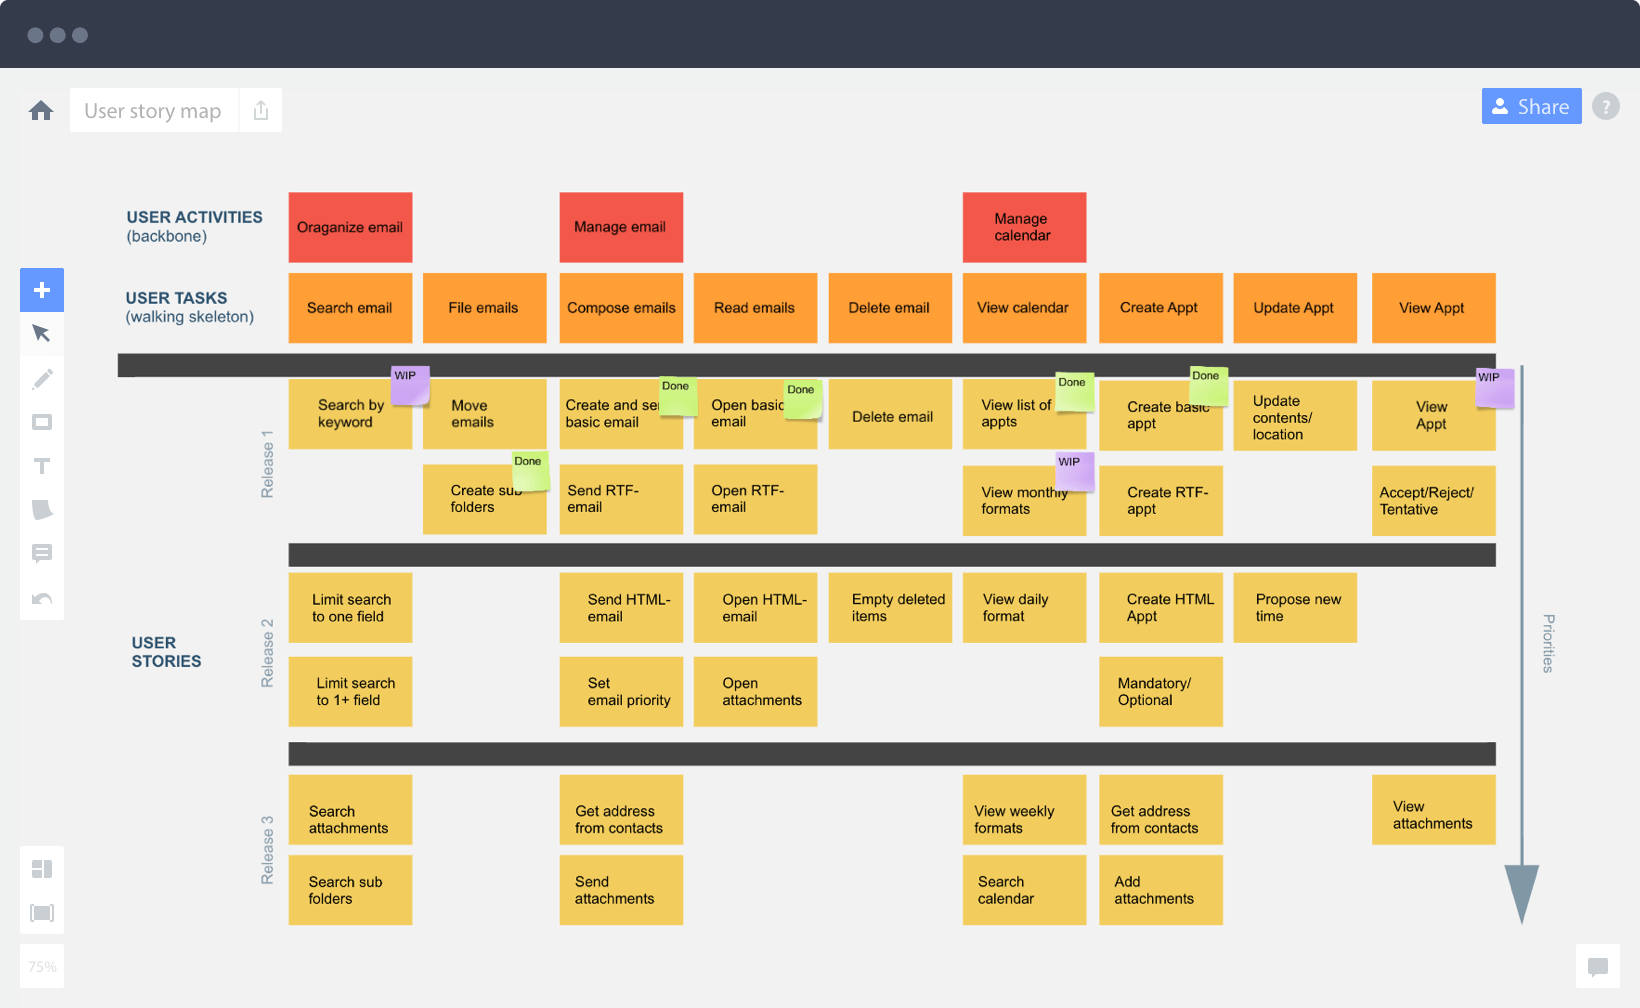 user stories map